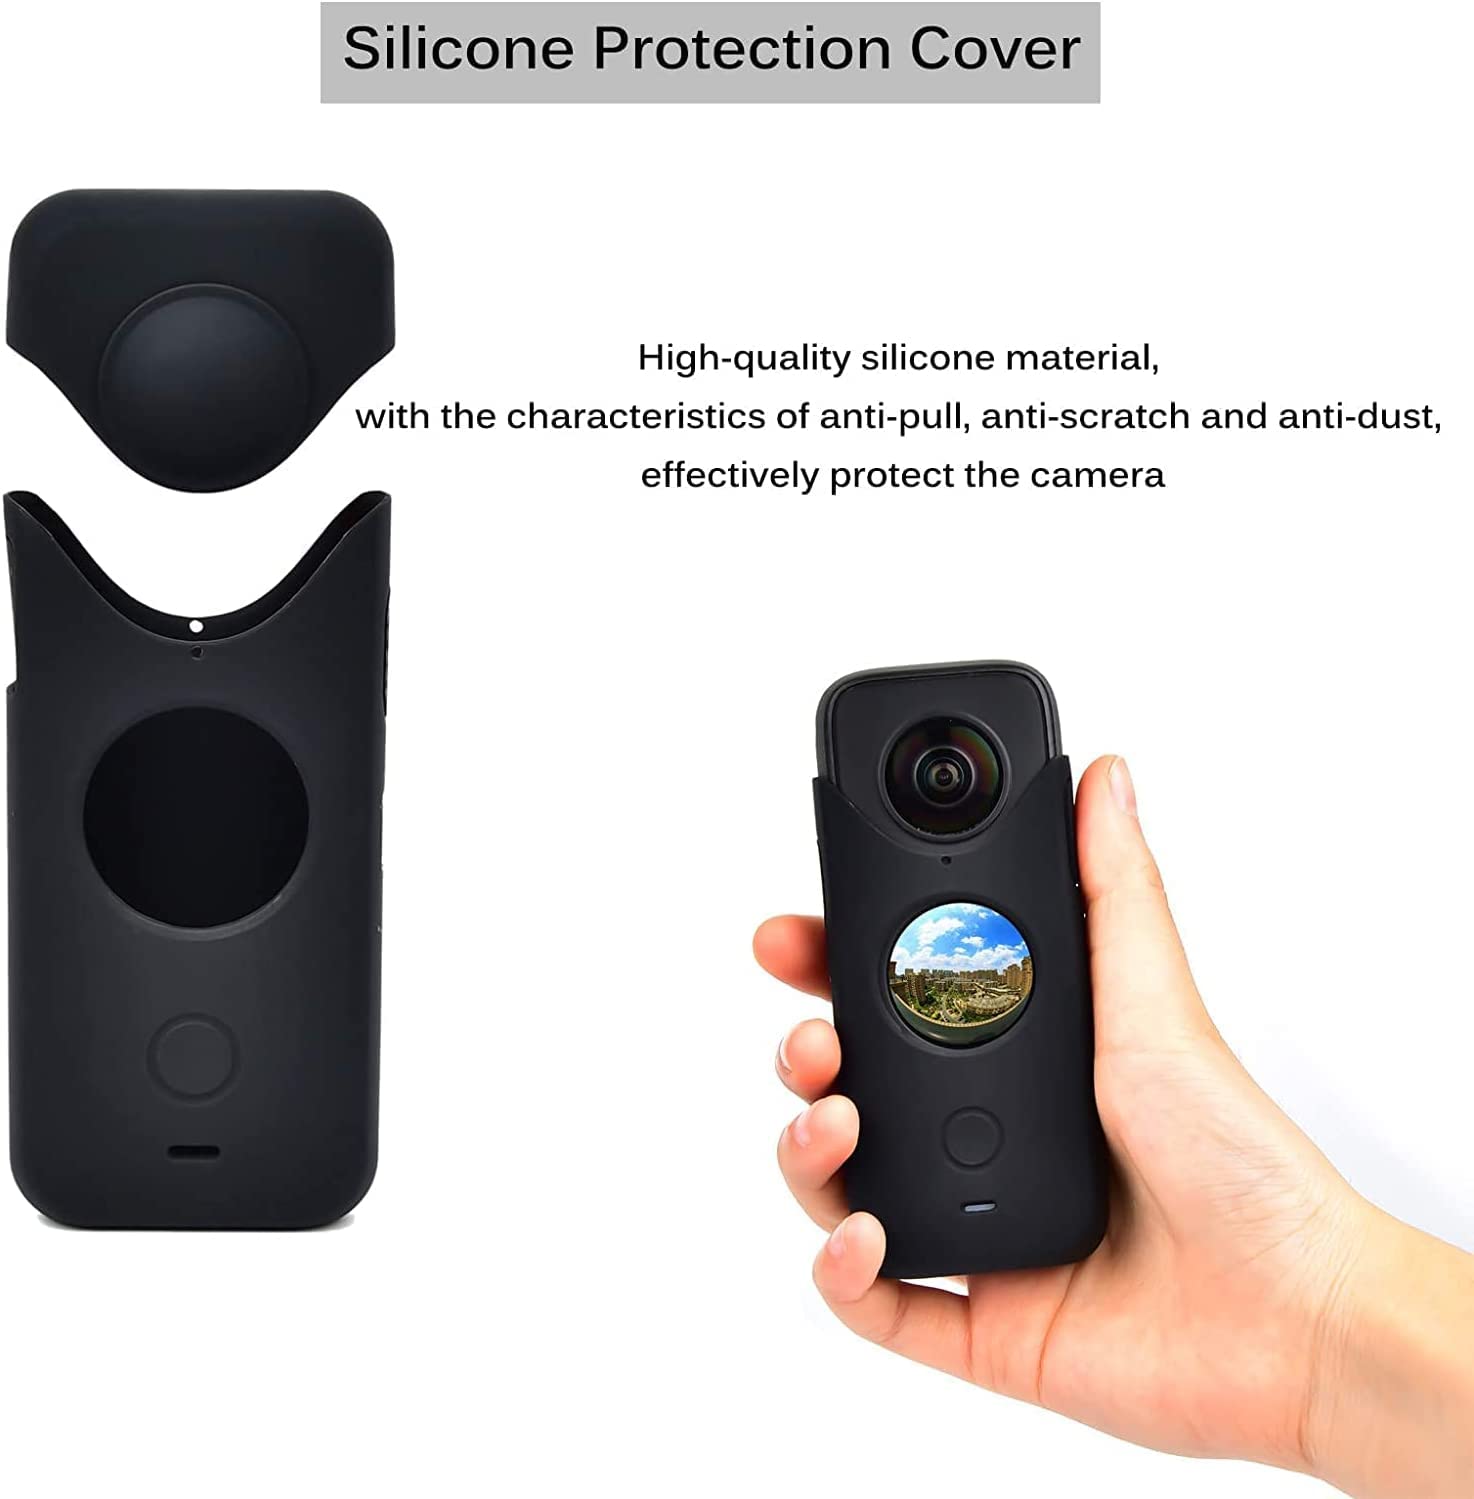 Protective-Frame-Camera-MountBlack-Silicon-Rubber-Sleeve-for-Insta360-ONE-X2-Action-Camera-Shock-Absorbing-Protective-Housing-with-Adapter-Mount-and-Screw